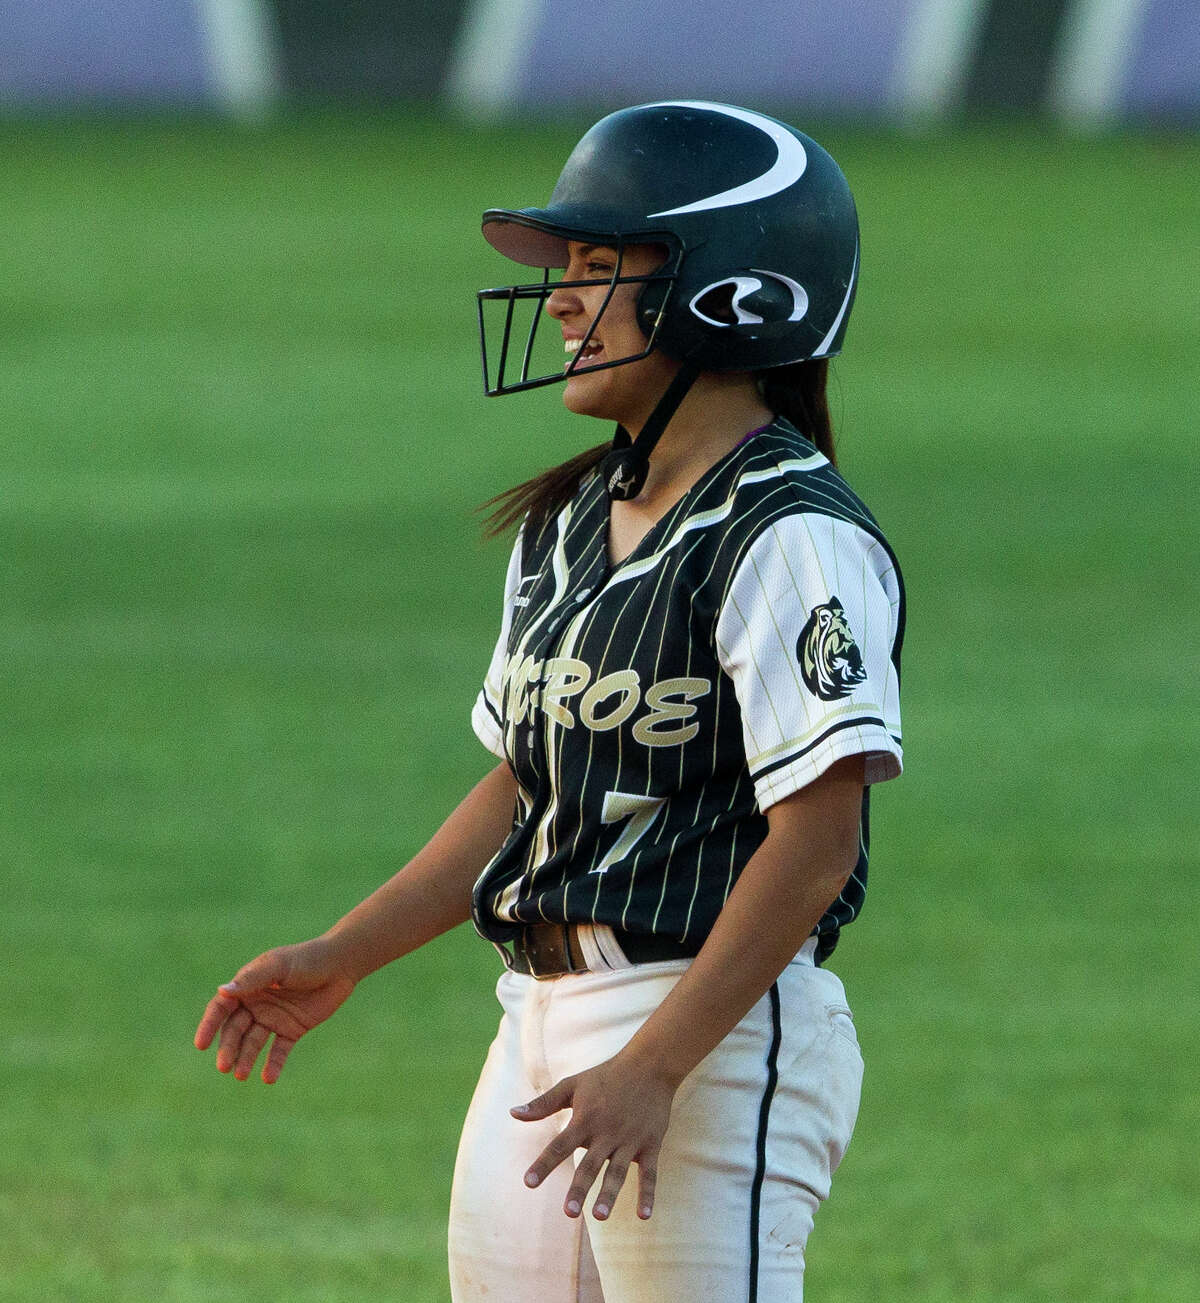 Laryssa Gonzales #7 of Conroe smiles after hitting an RBI double to score Makenna Evans during the fourth inning of a District 12-6A high school softball game Tuesday, April 4, 2017, in Conroe. Oak Ridge defeated Conroe 4-2.